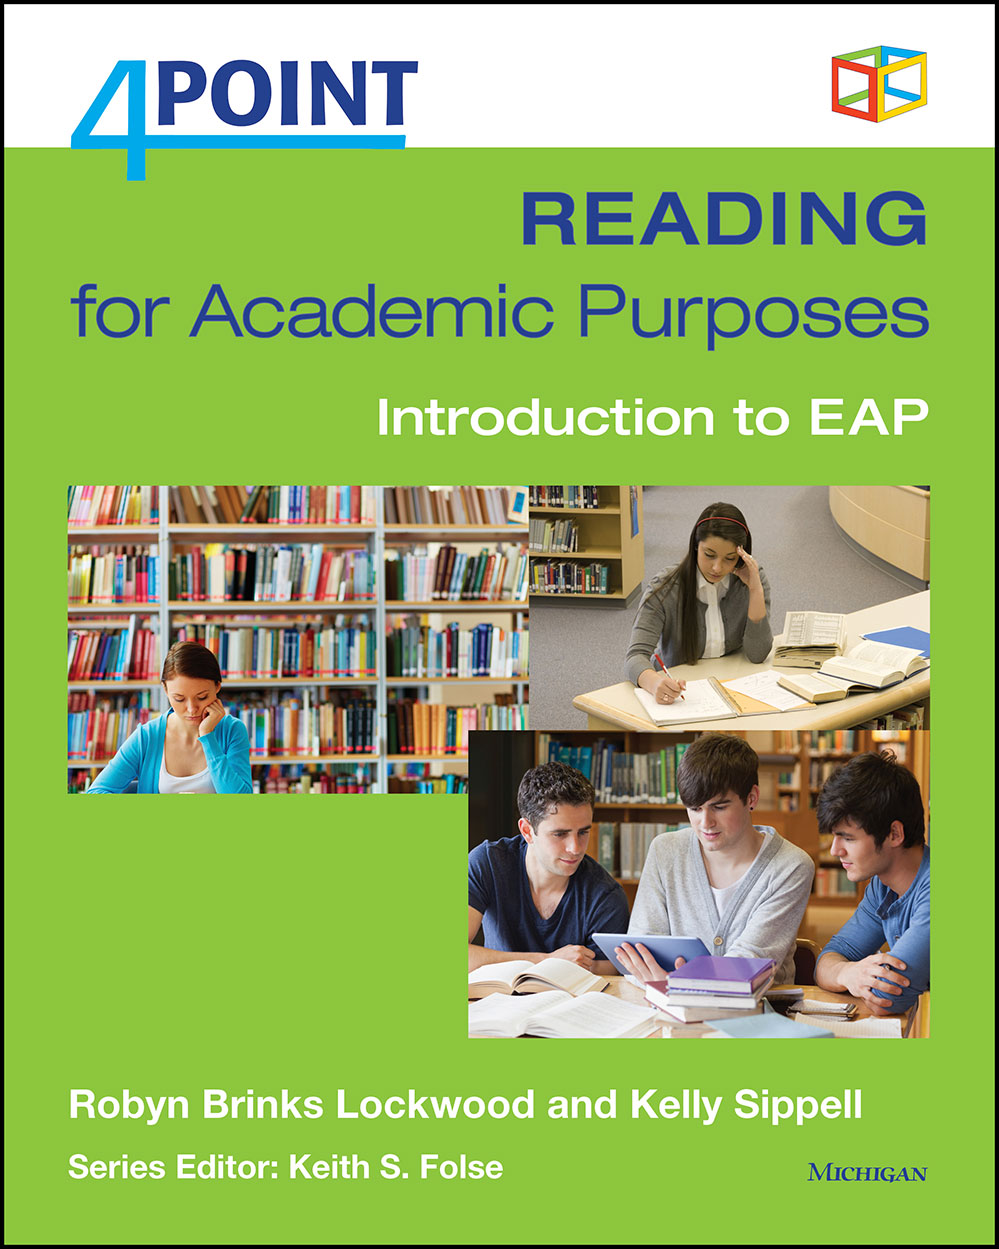 4 Point Reading for Academic Purposes